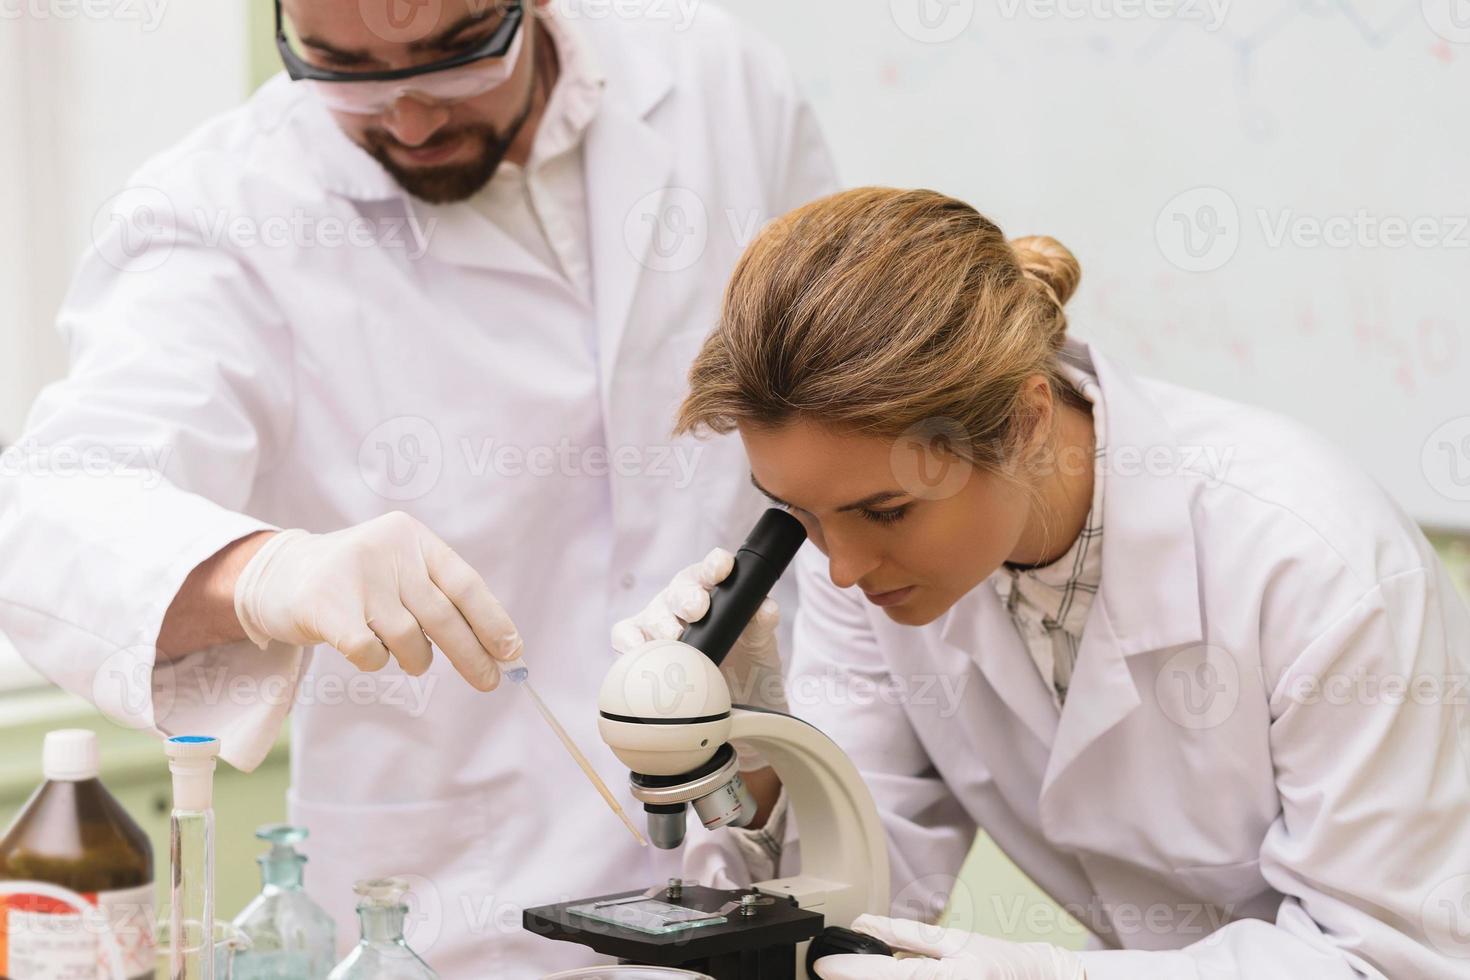 Two Scientist Colleagues Are Using Microscope During Research In A